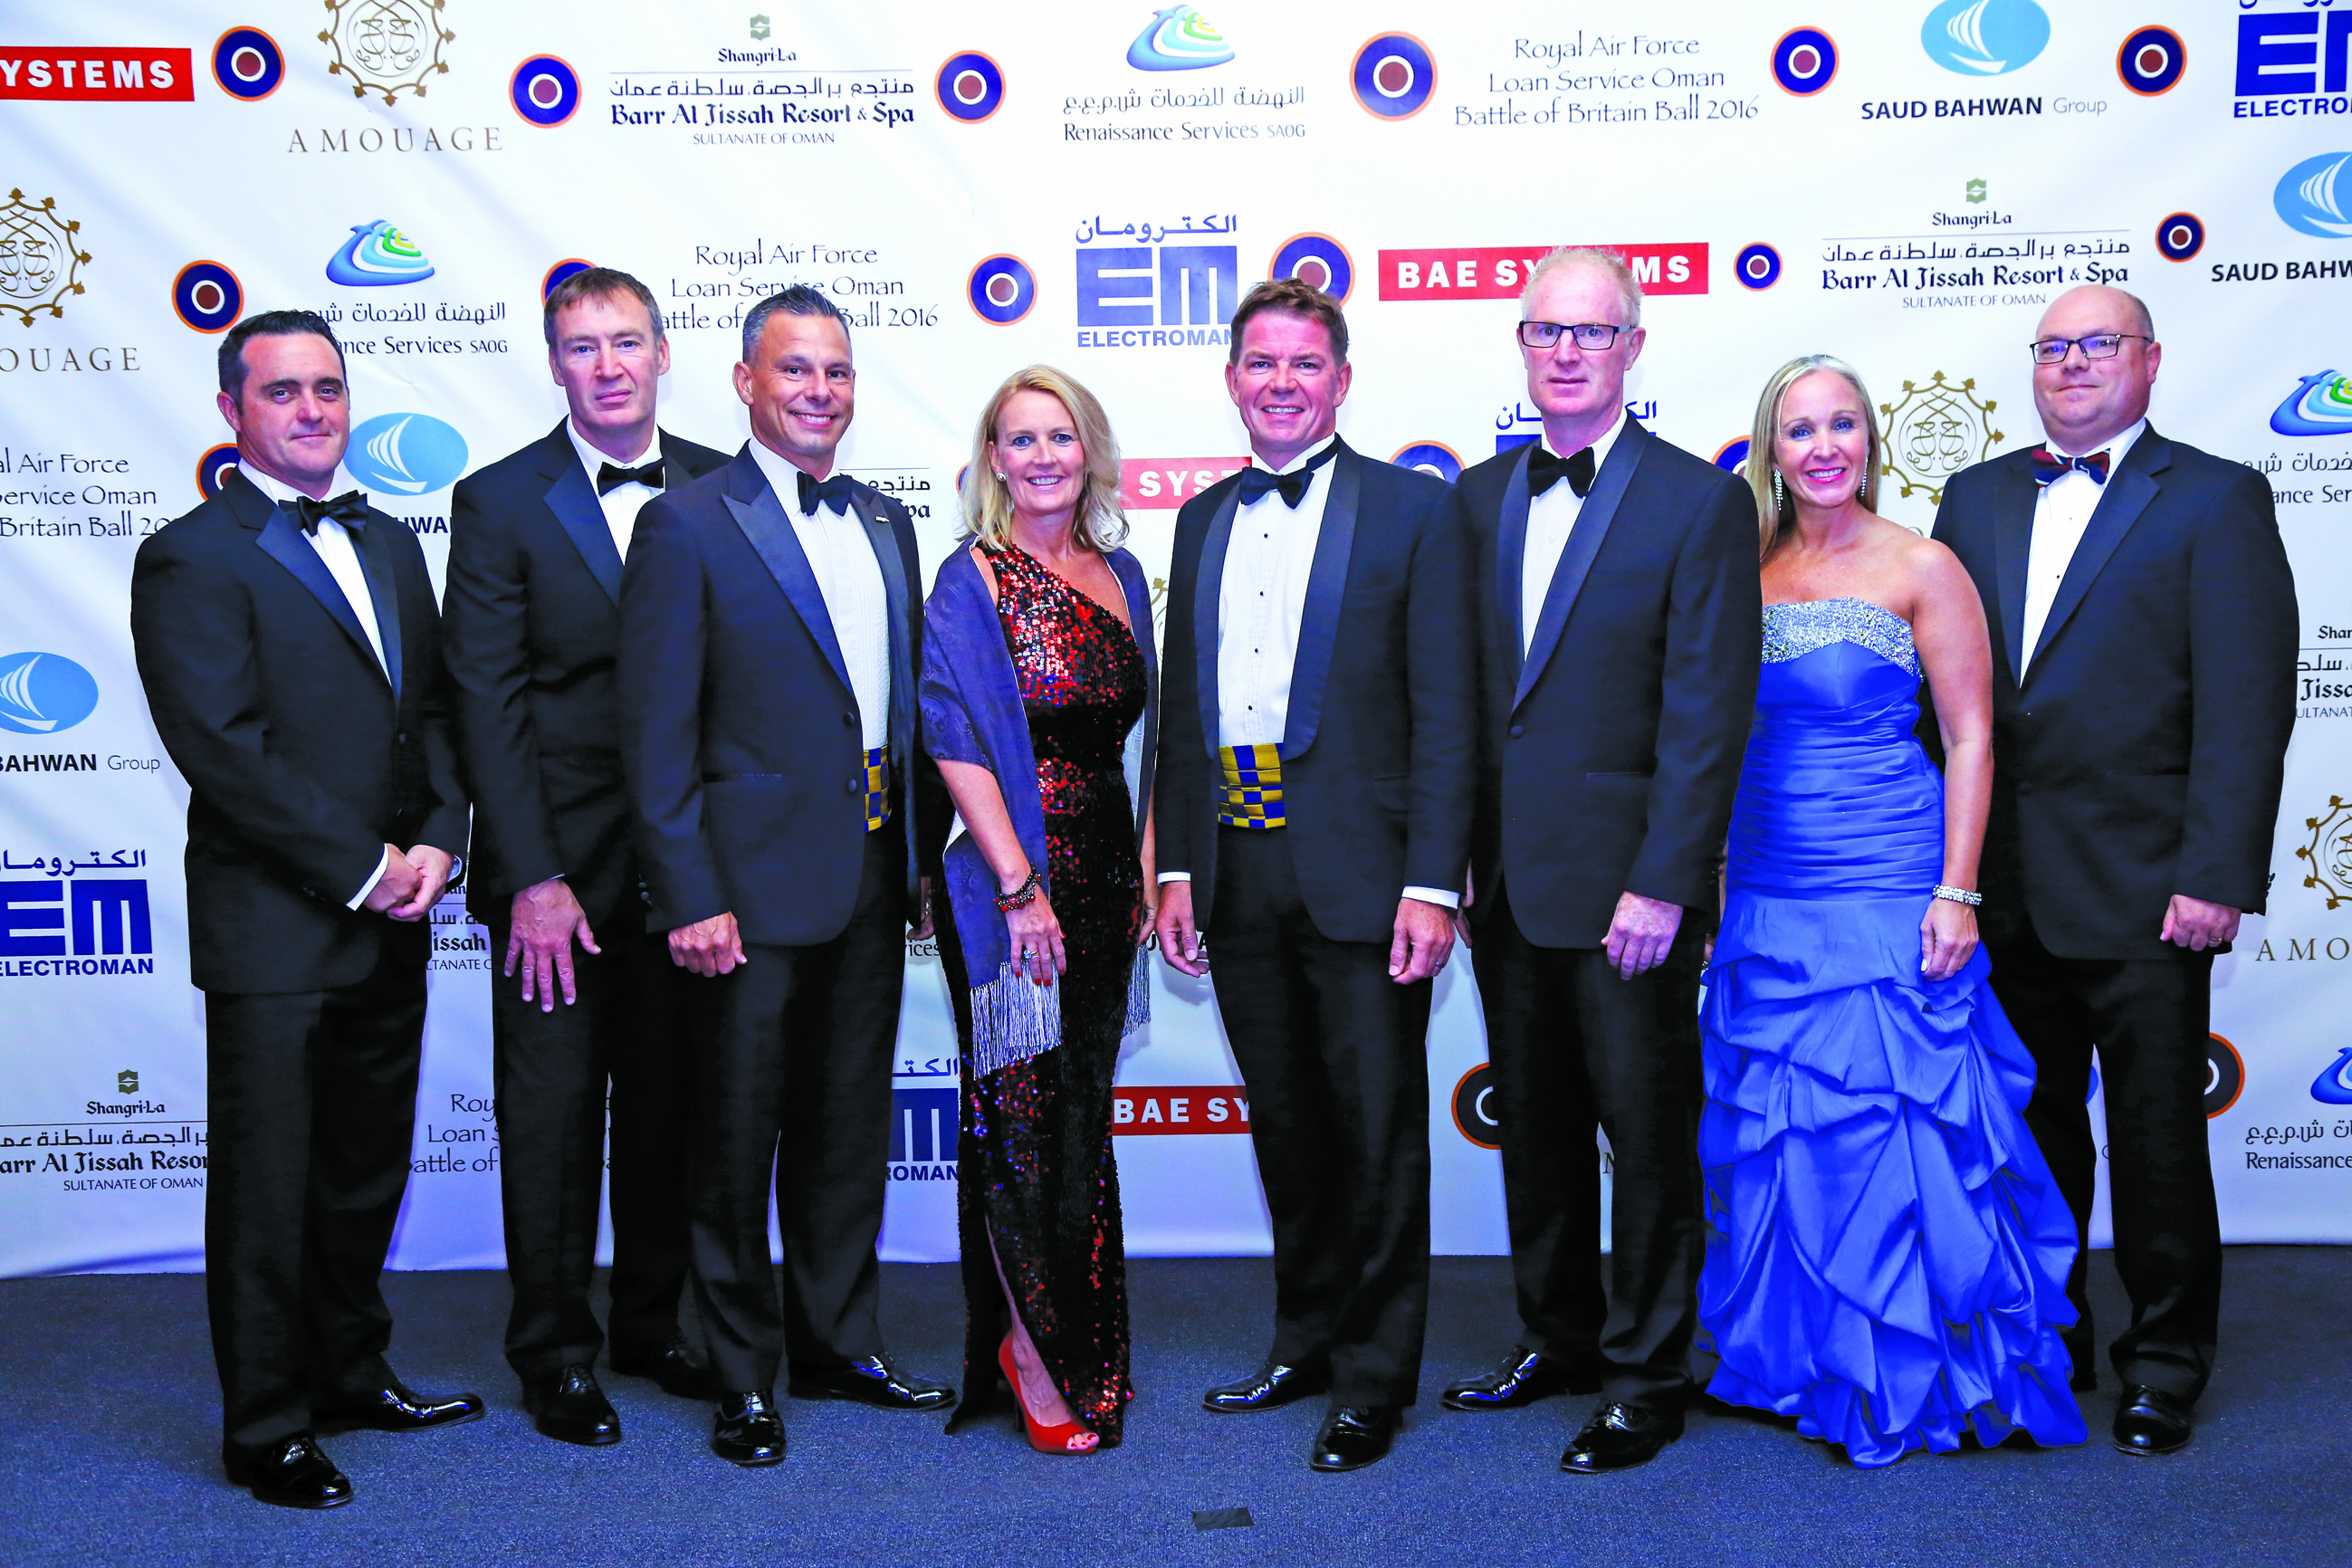 Battle of Britain Ball raises OMR12,000 for charity in Oman